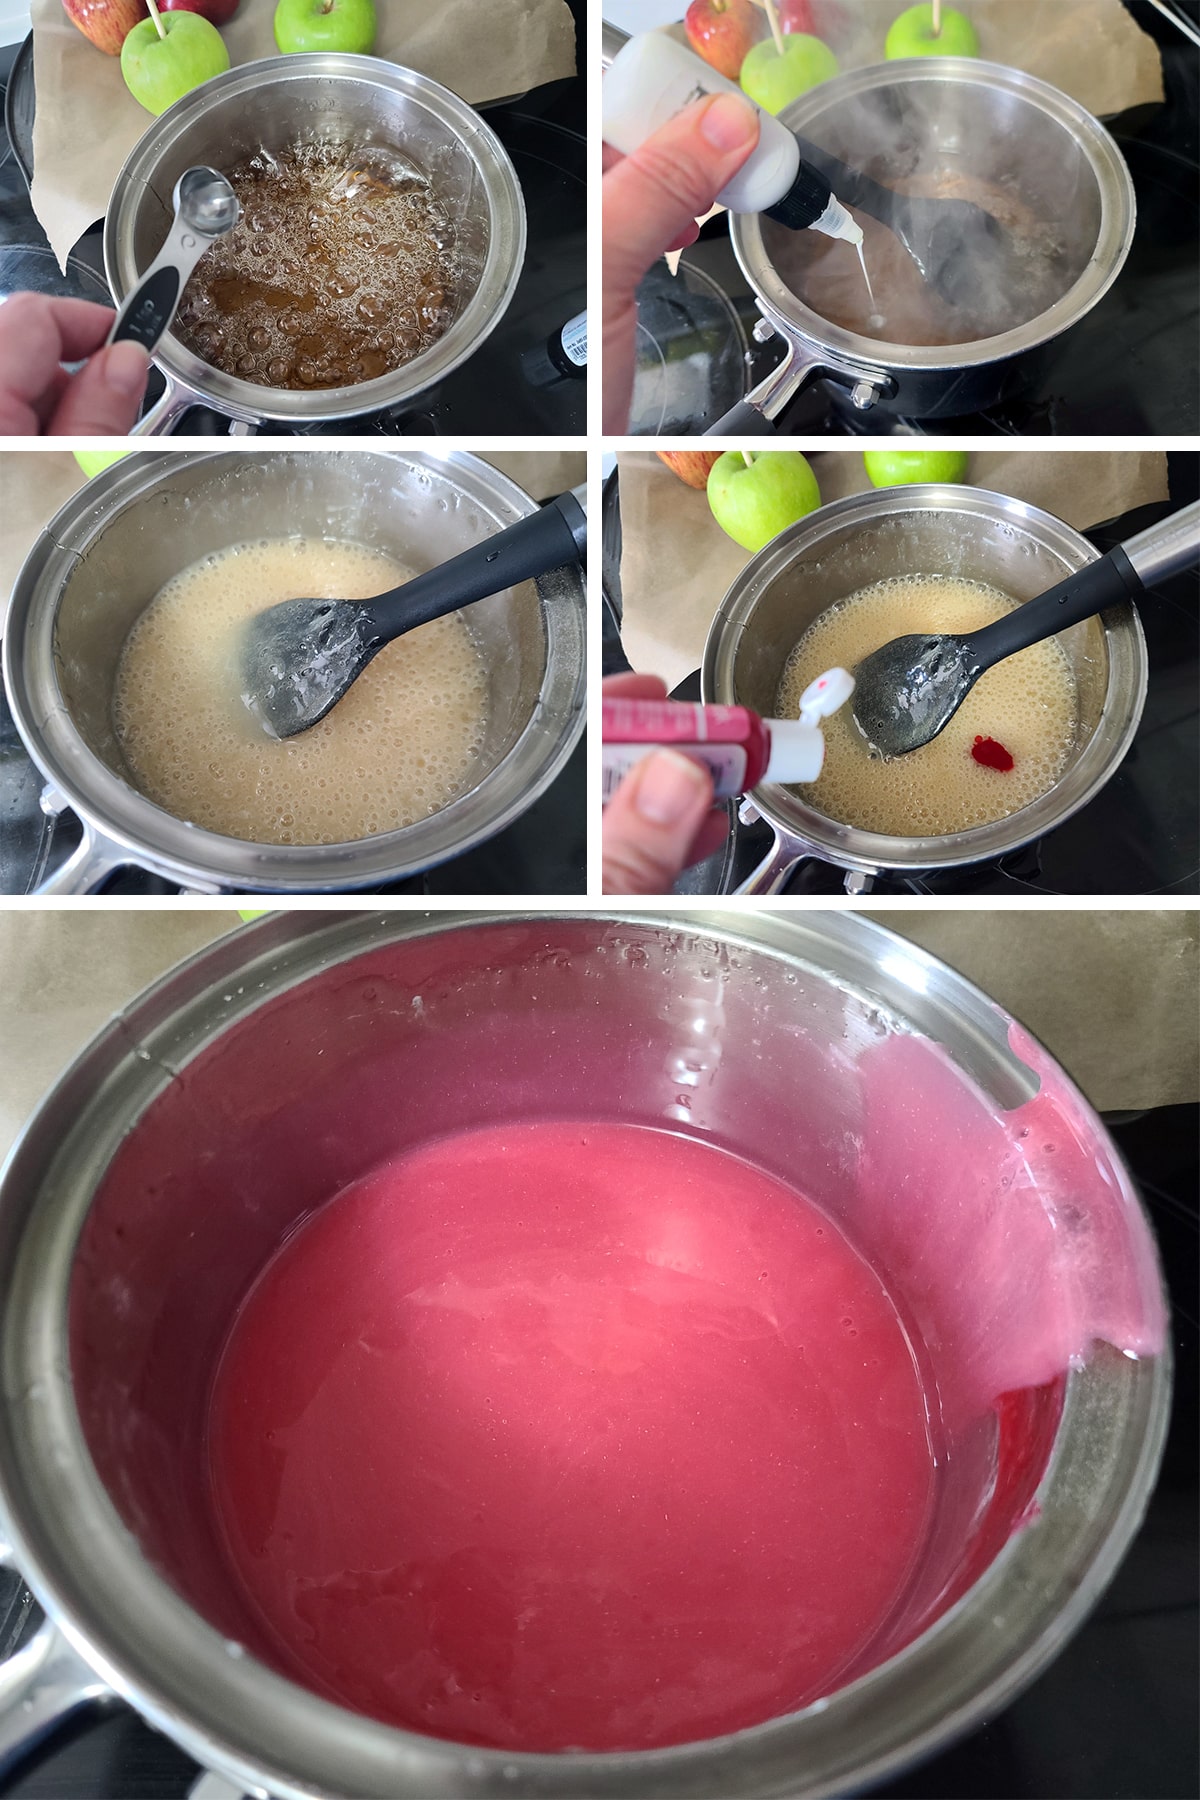 A 5 part image showing the food coloring and flavor being added to the candy syrup.